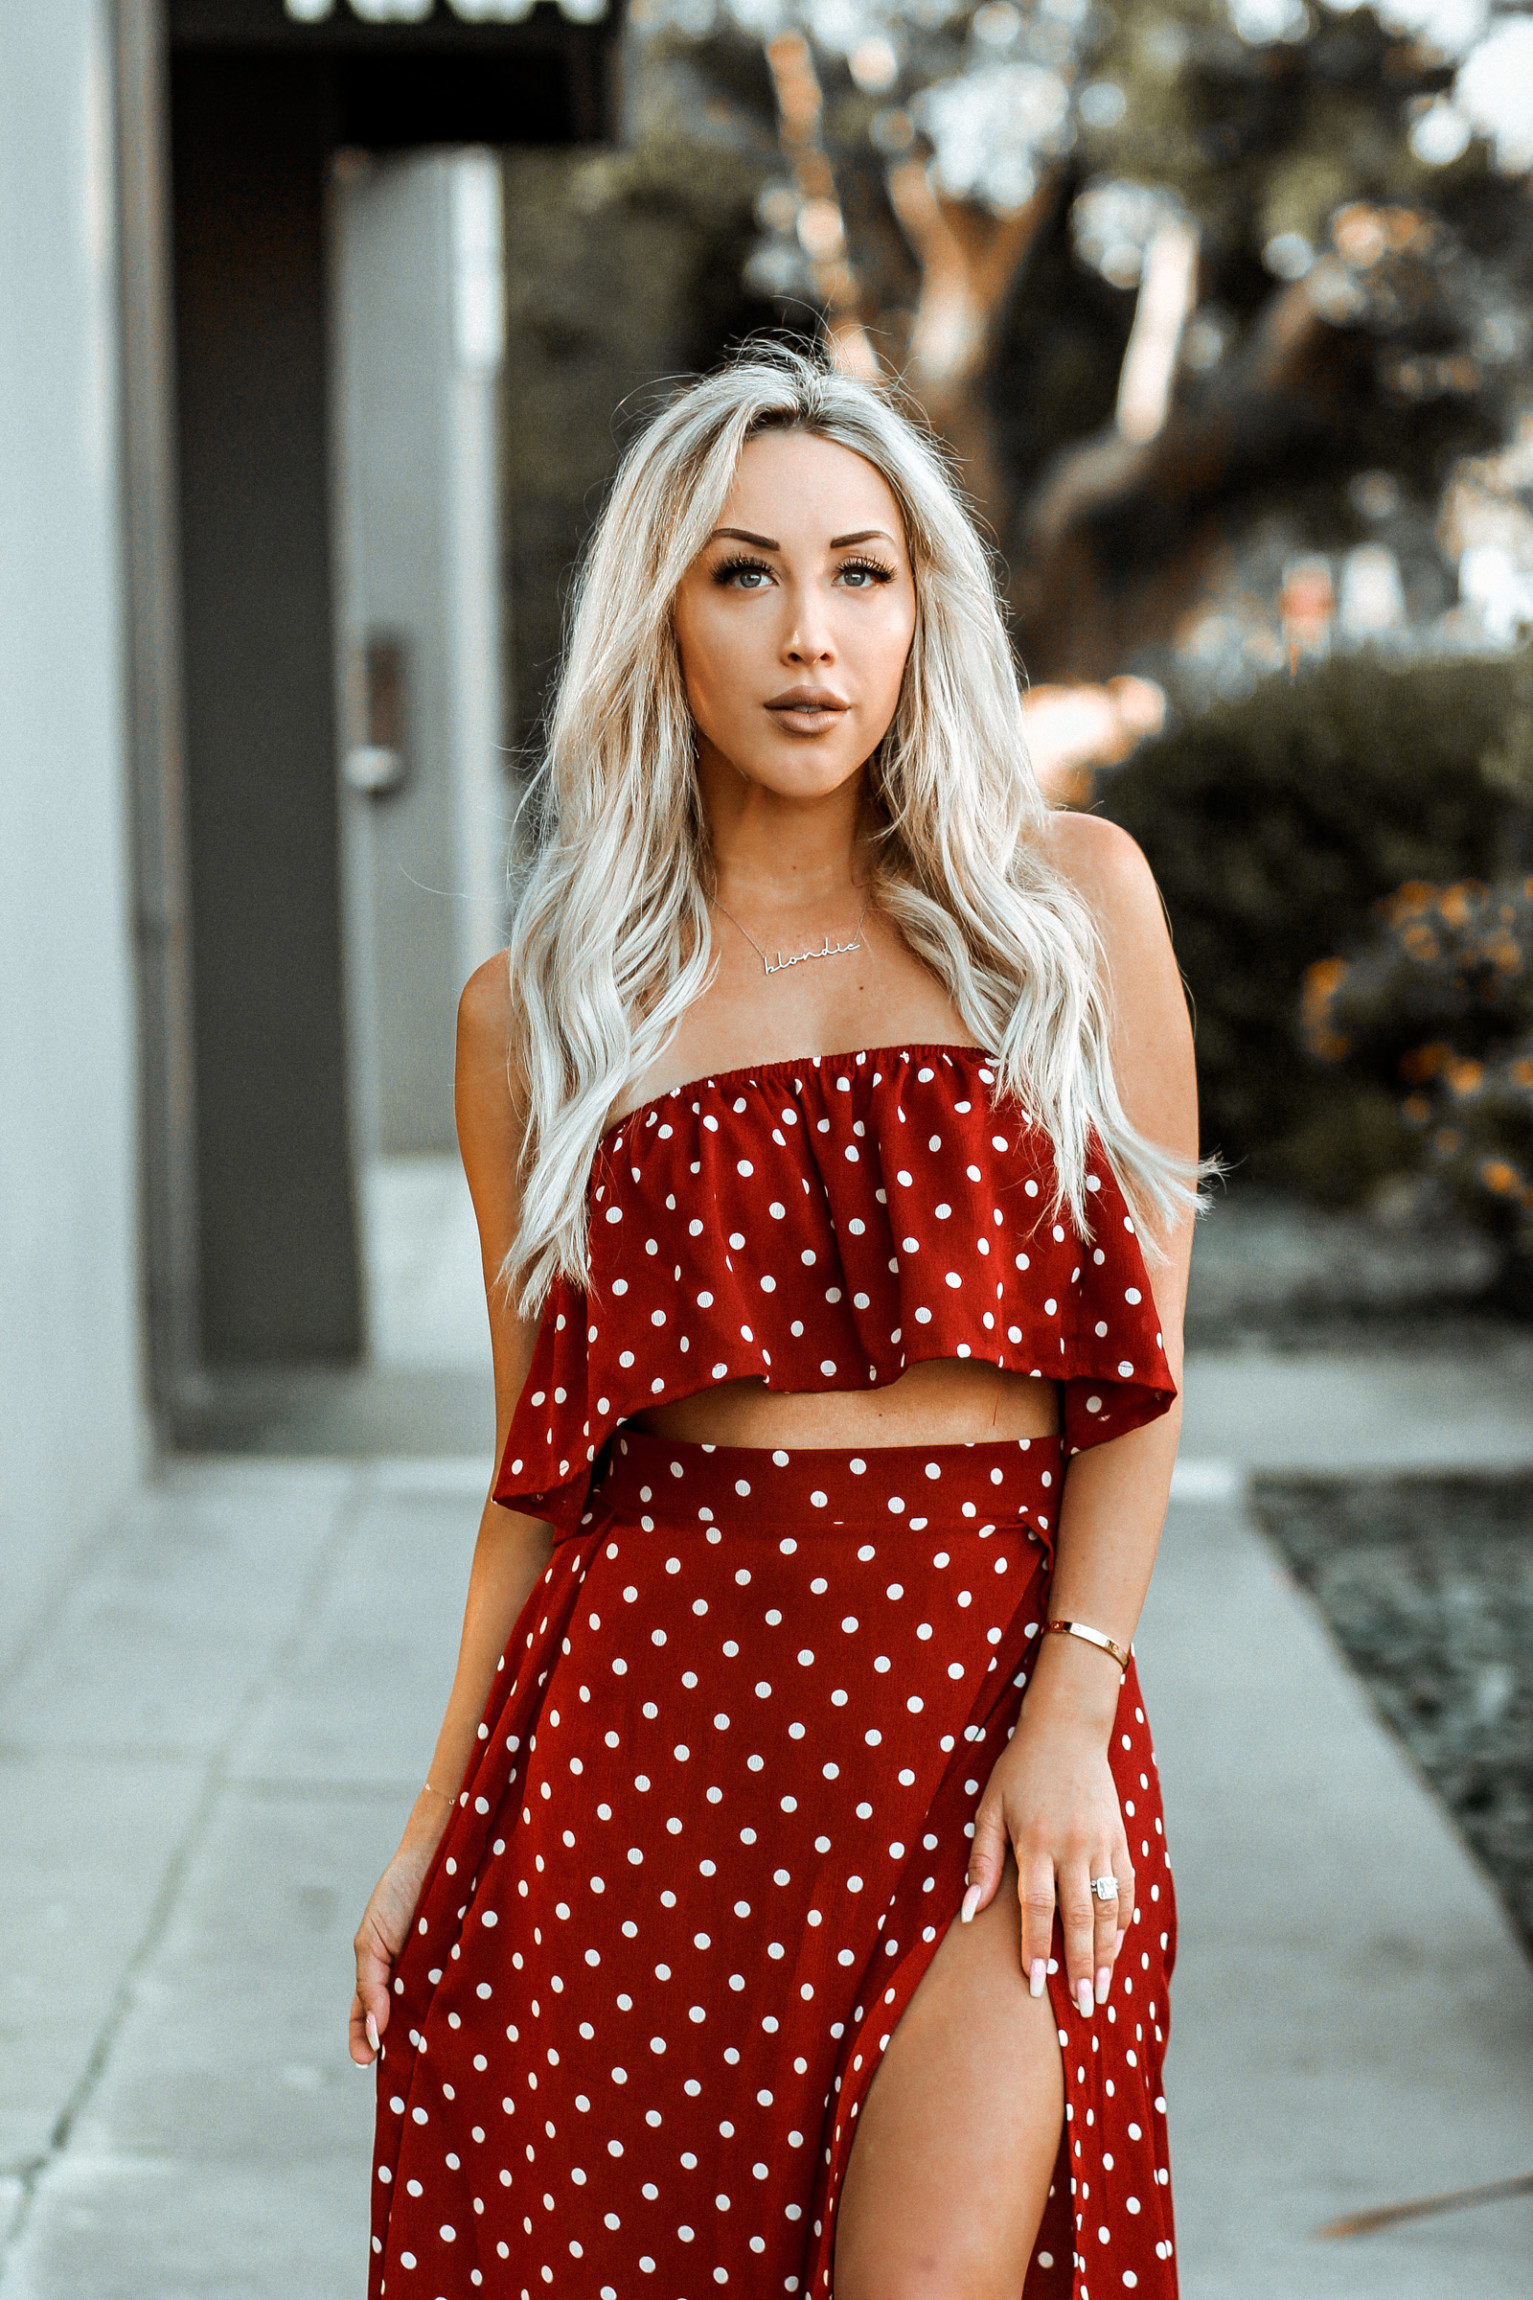 Red Polka Dot Two-Piece | Summer Style | Blondie in the City by Hayley Larue